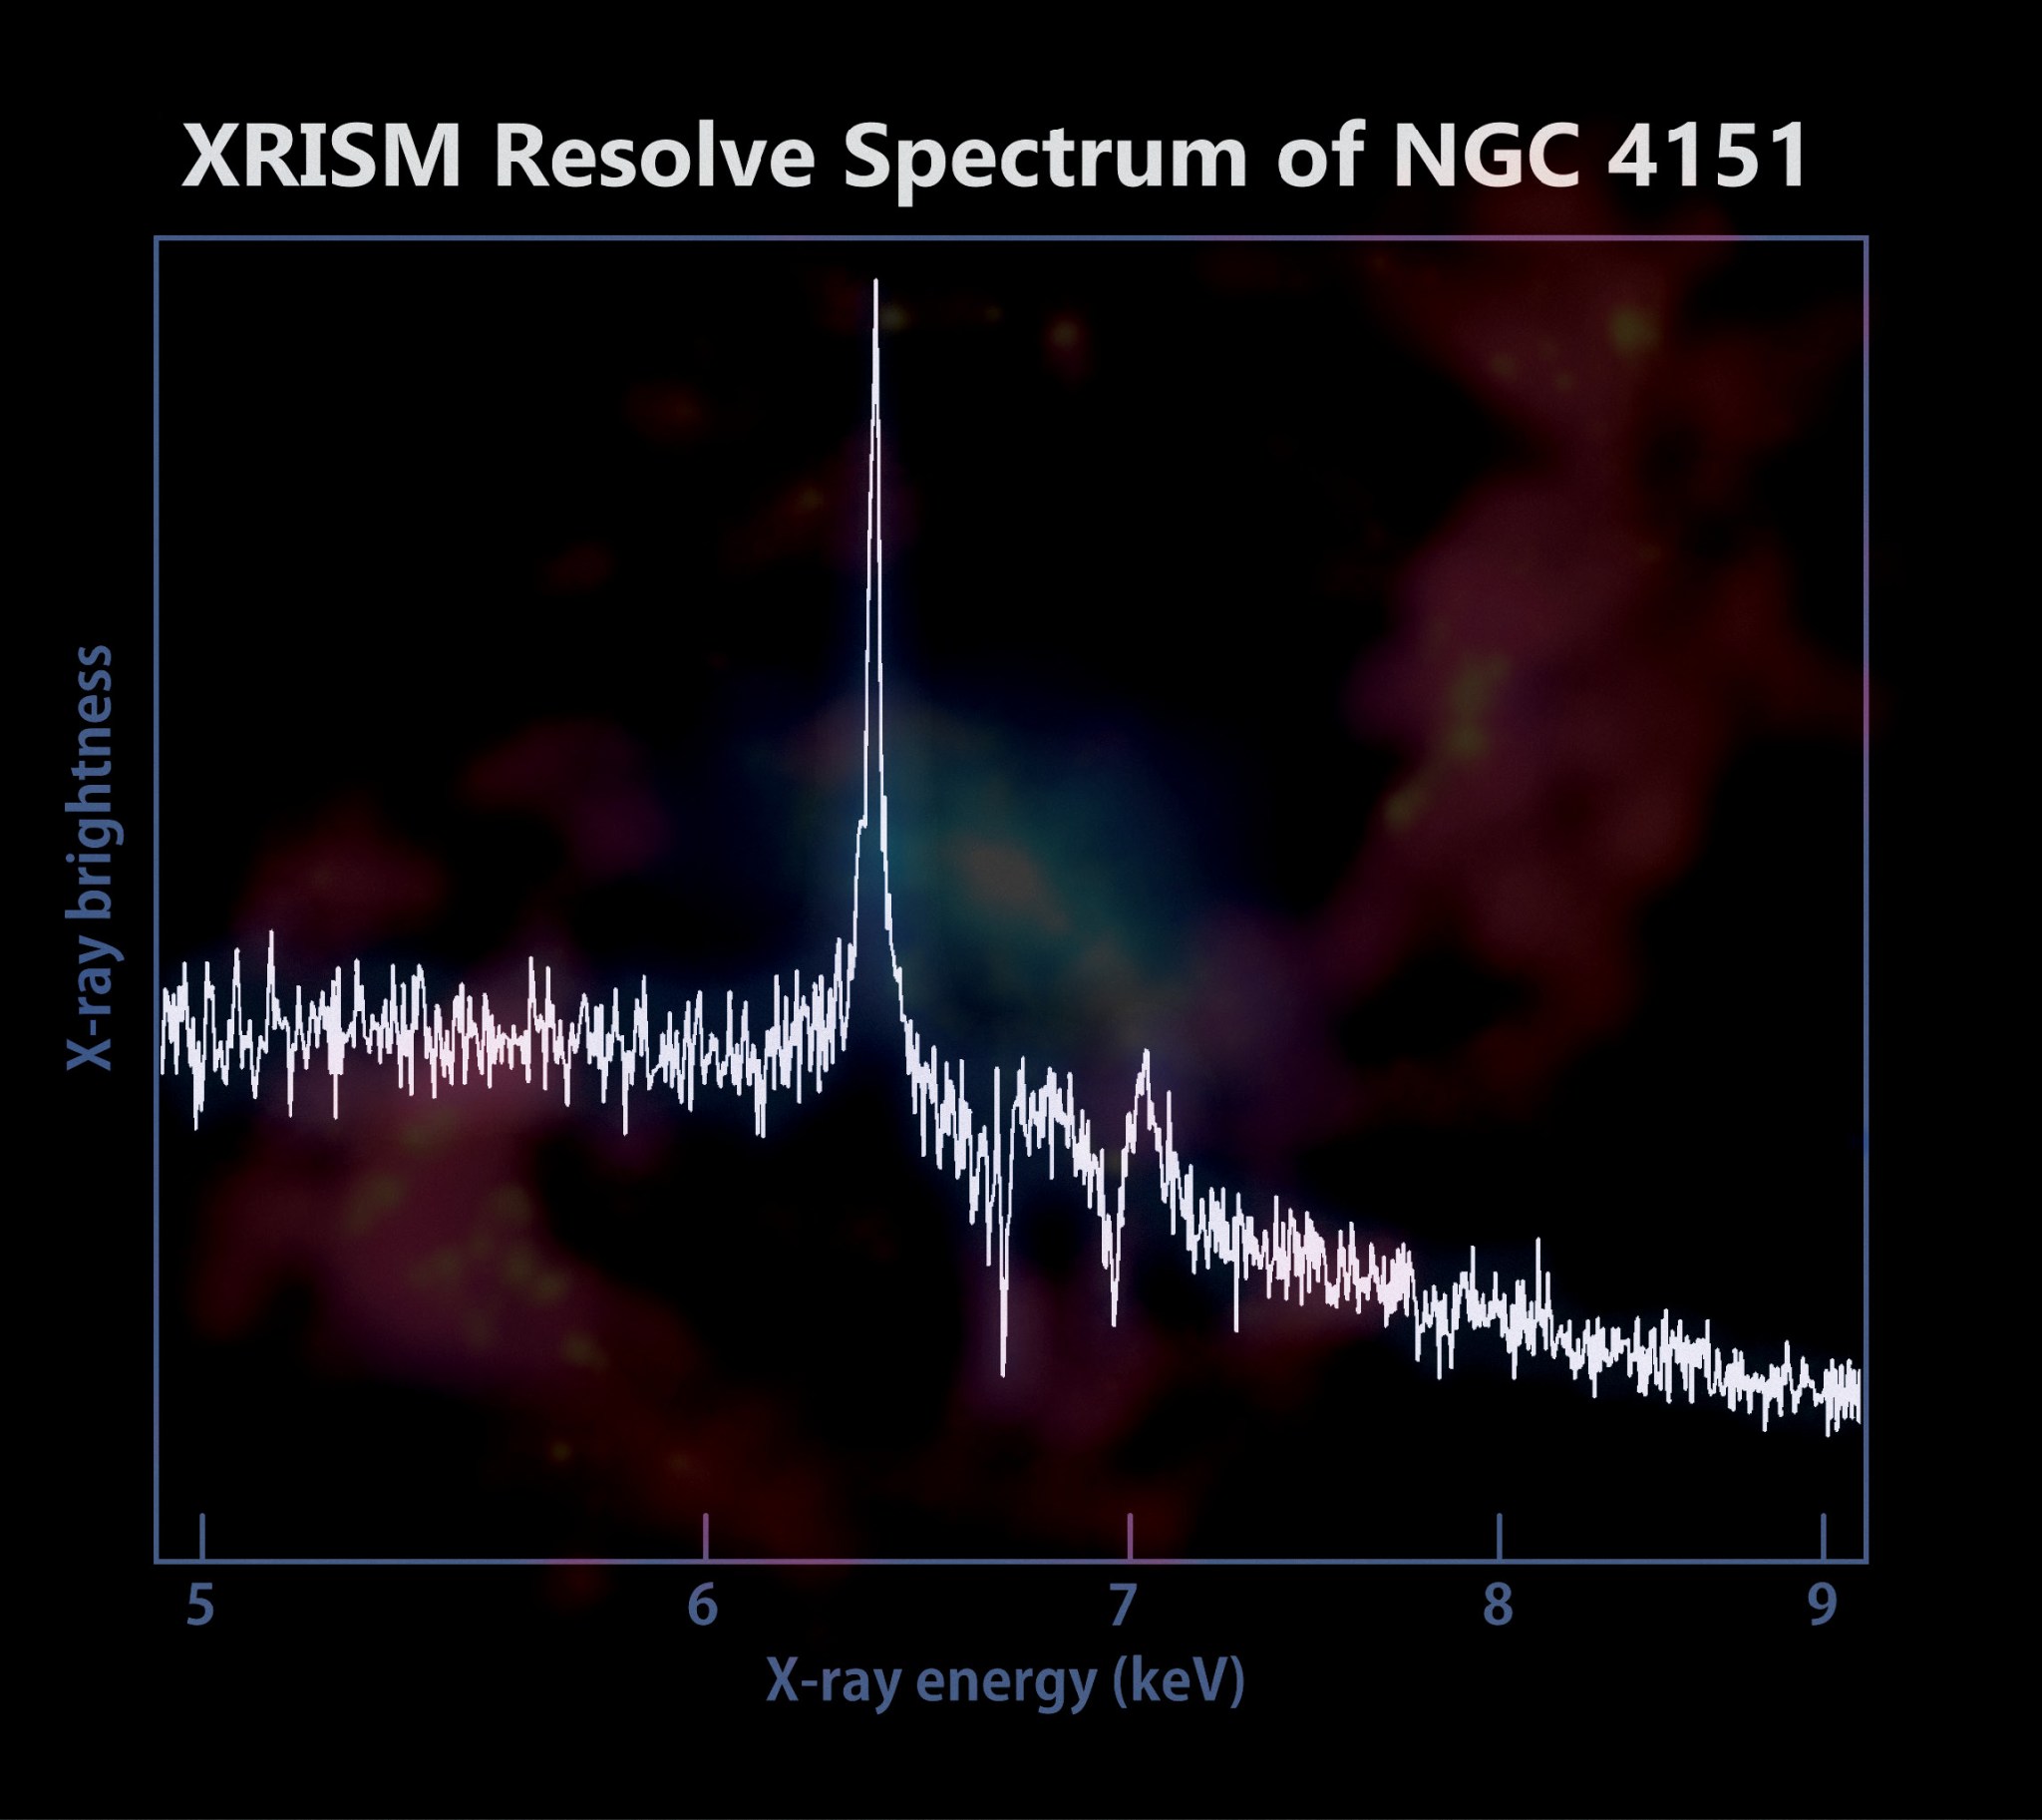 A XRISM spectrum of NGC 4151 with a multiwavelength snapshot of the galaxy in the background.